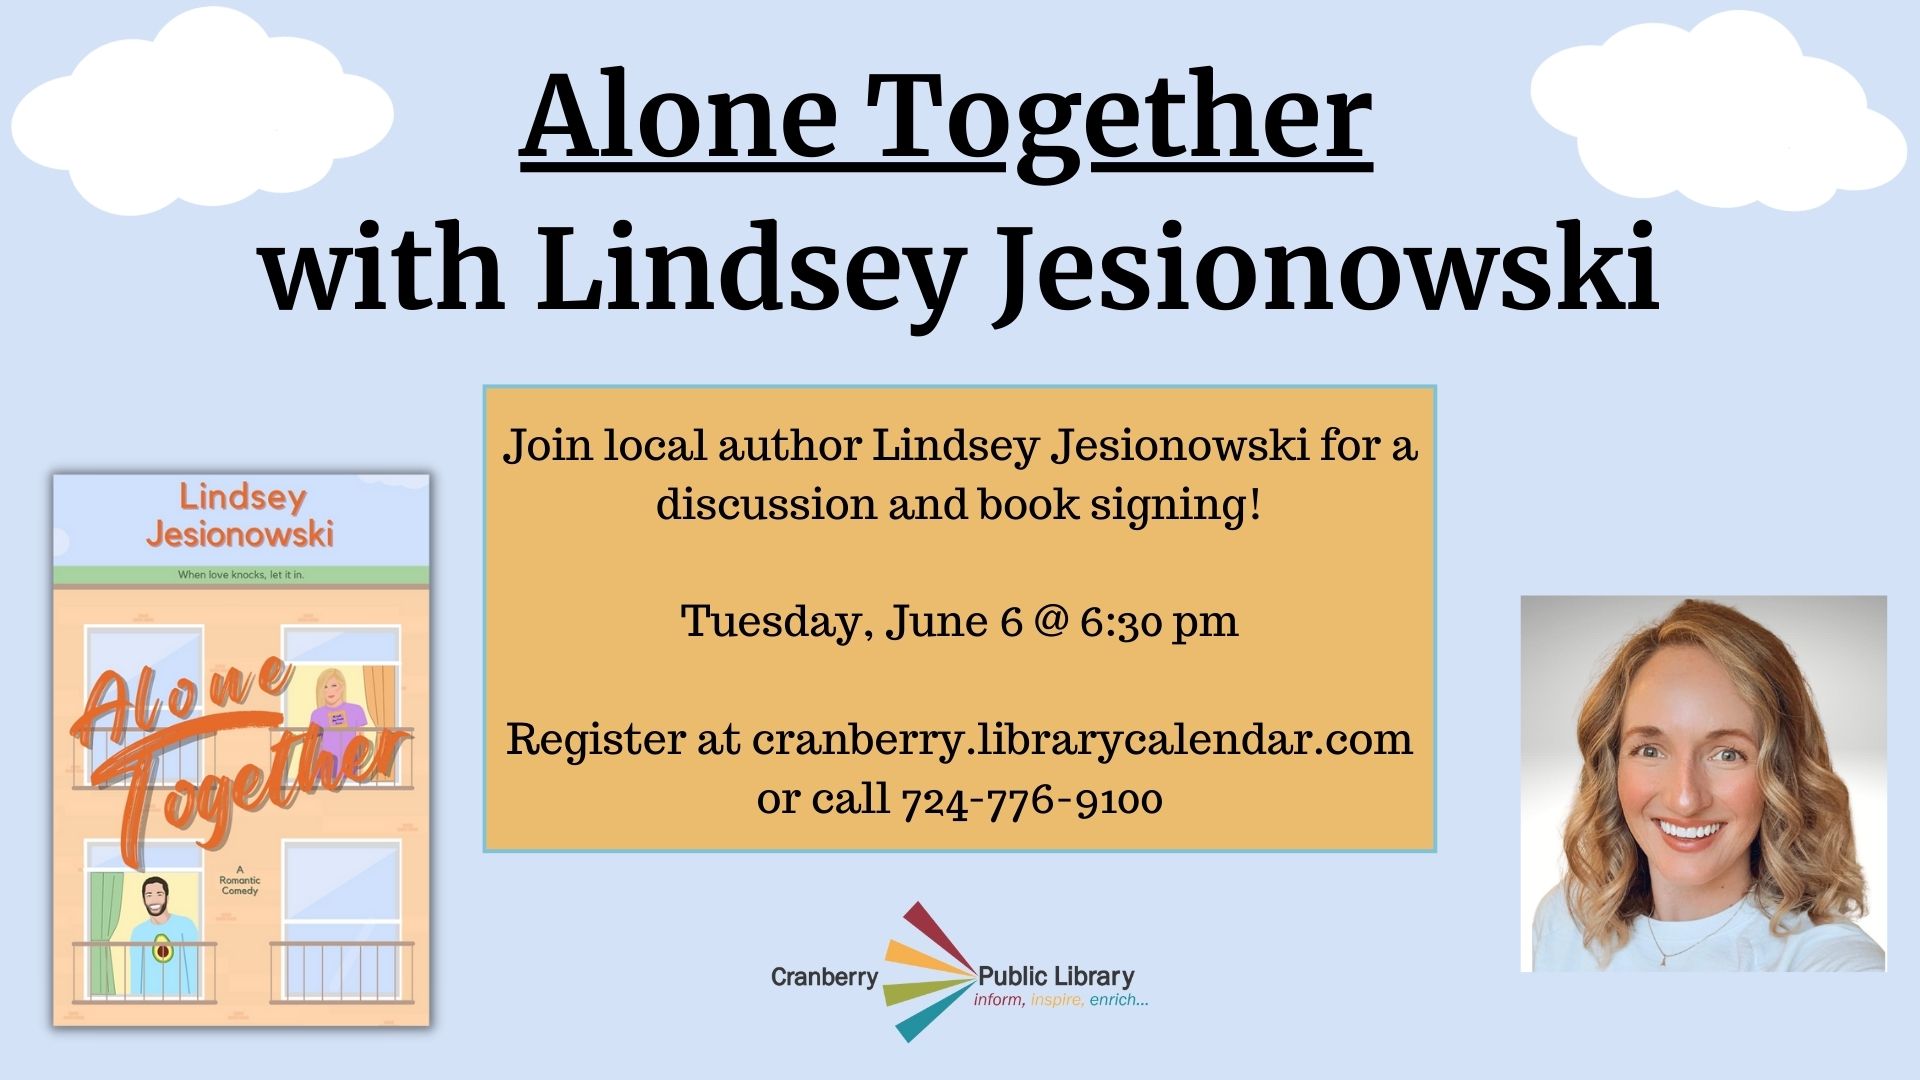 Flyer for Alone Together author talk